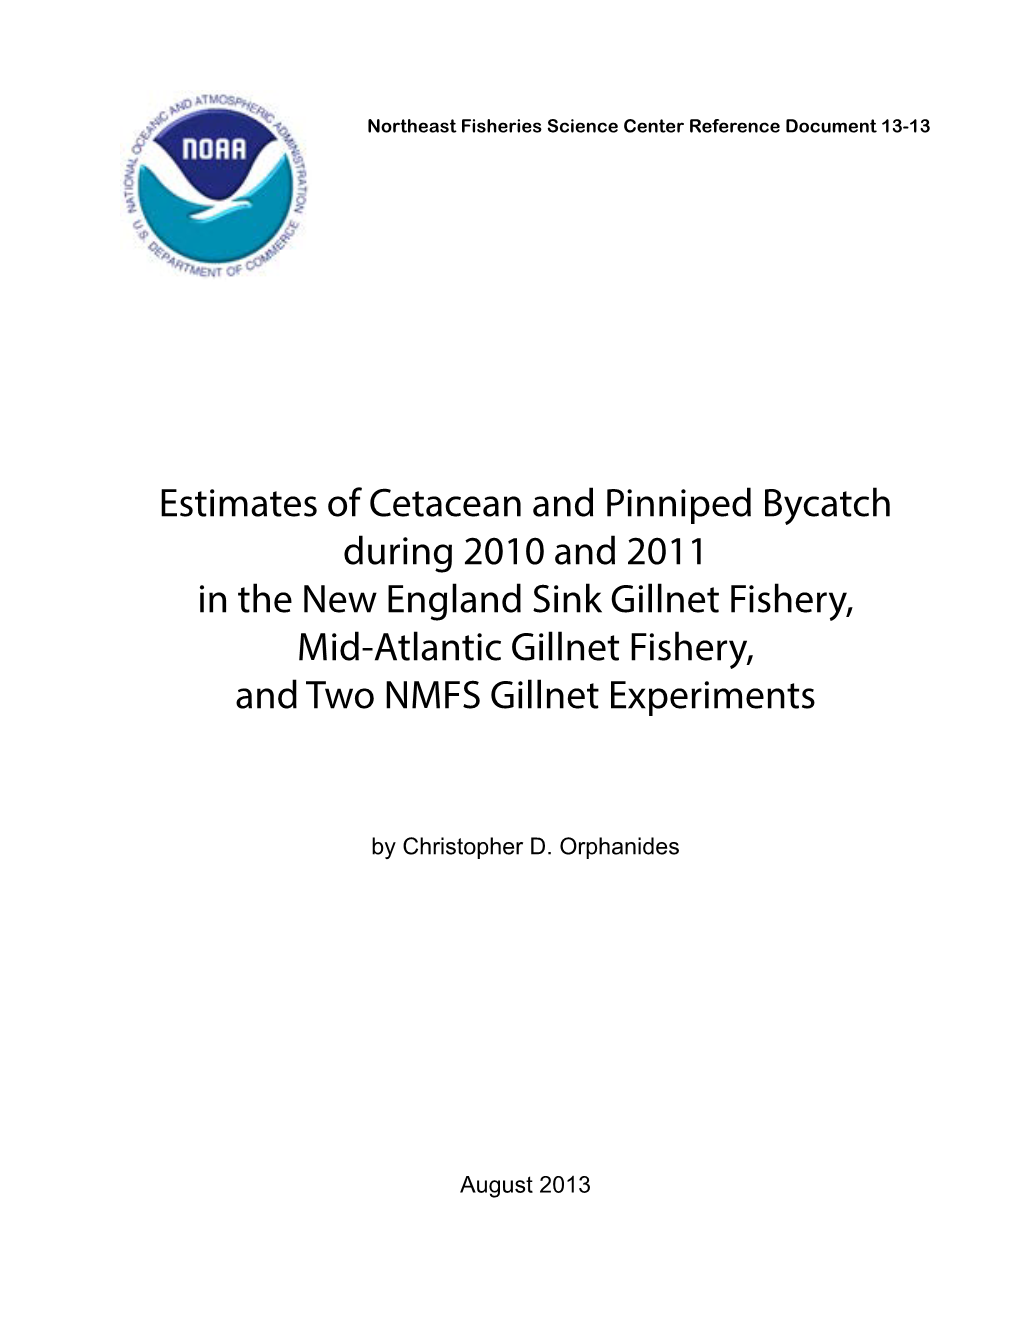 Estimates of Cetacean and Pinniped Bycatch During 2010 and 2011 In